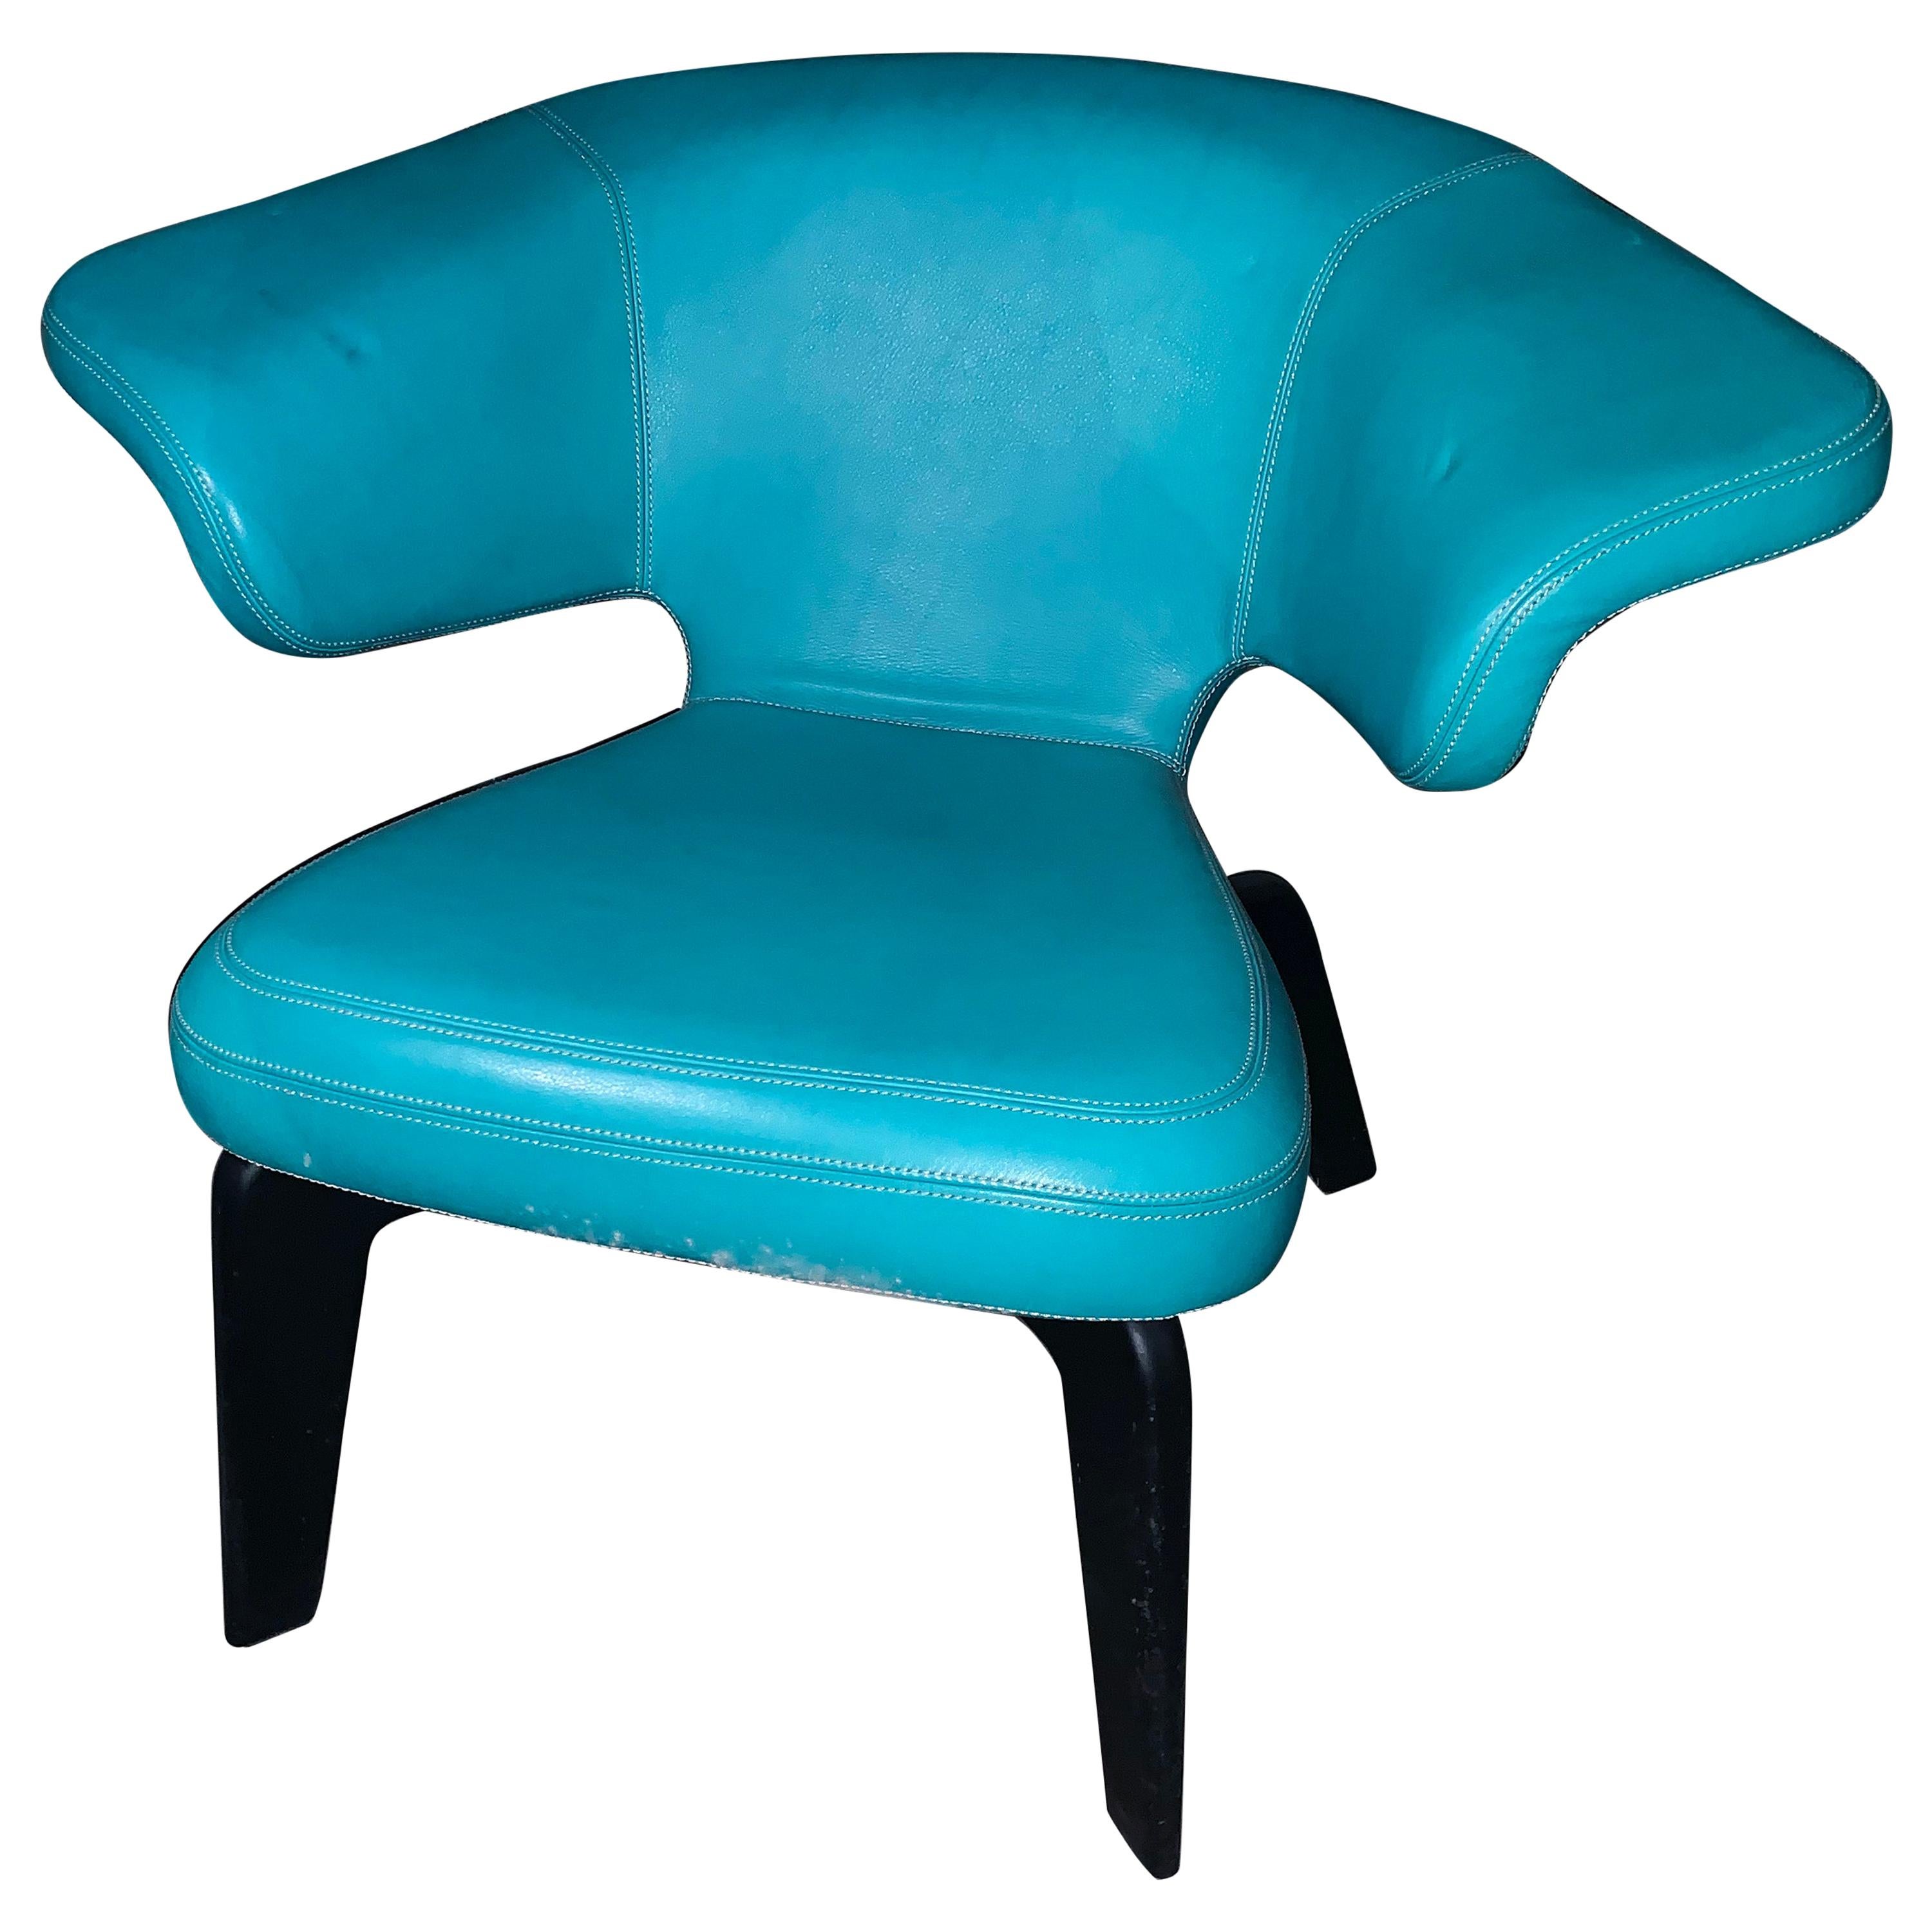 ClassiCon Turquoise Munich Lounge Chair Designed by Sauerbruch Hutton in STOCK